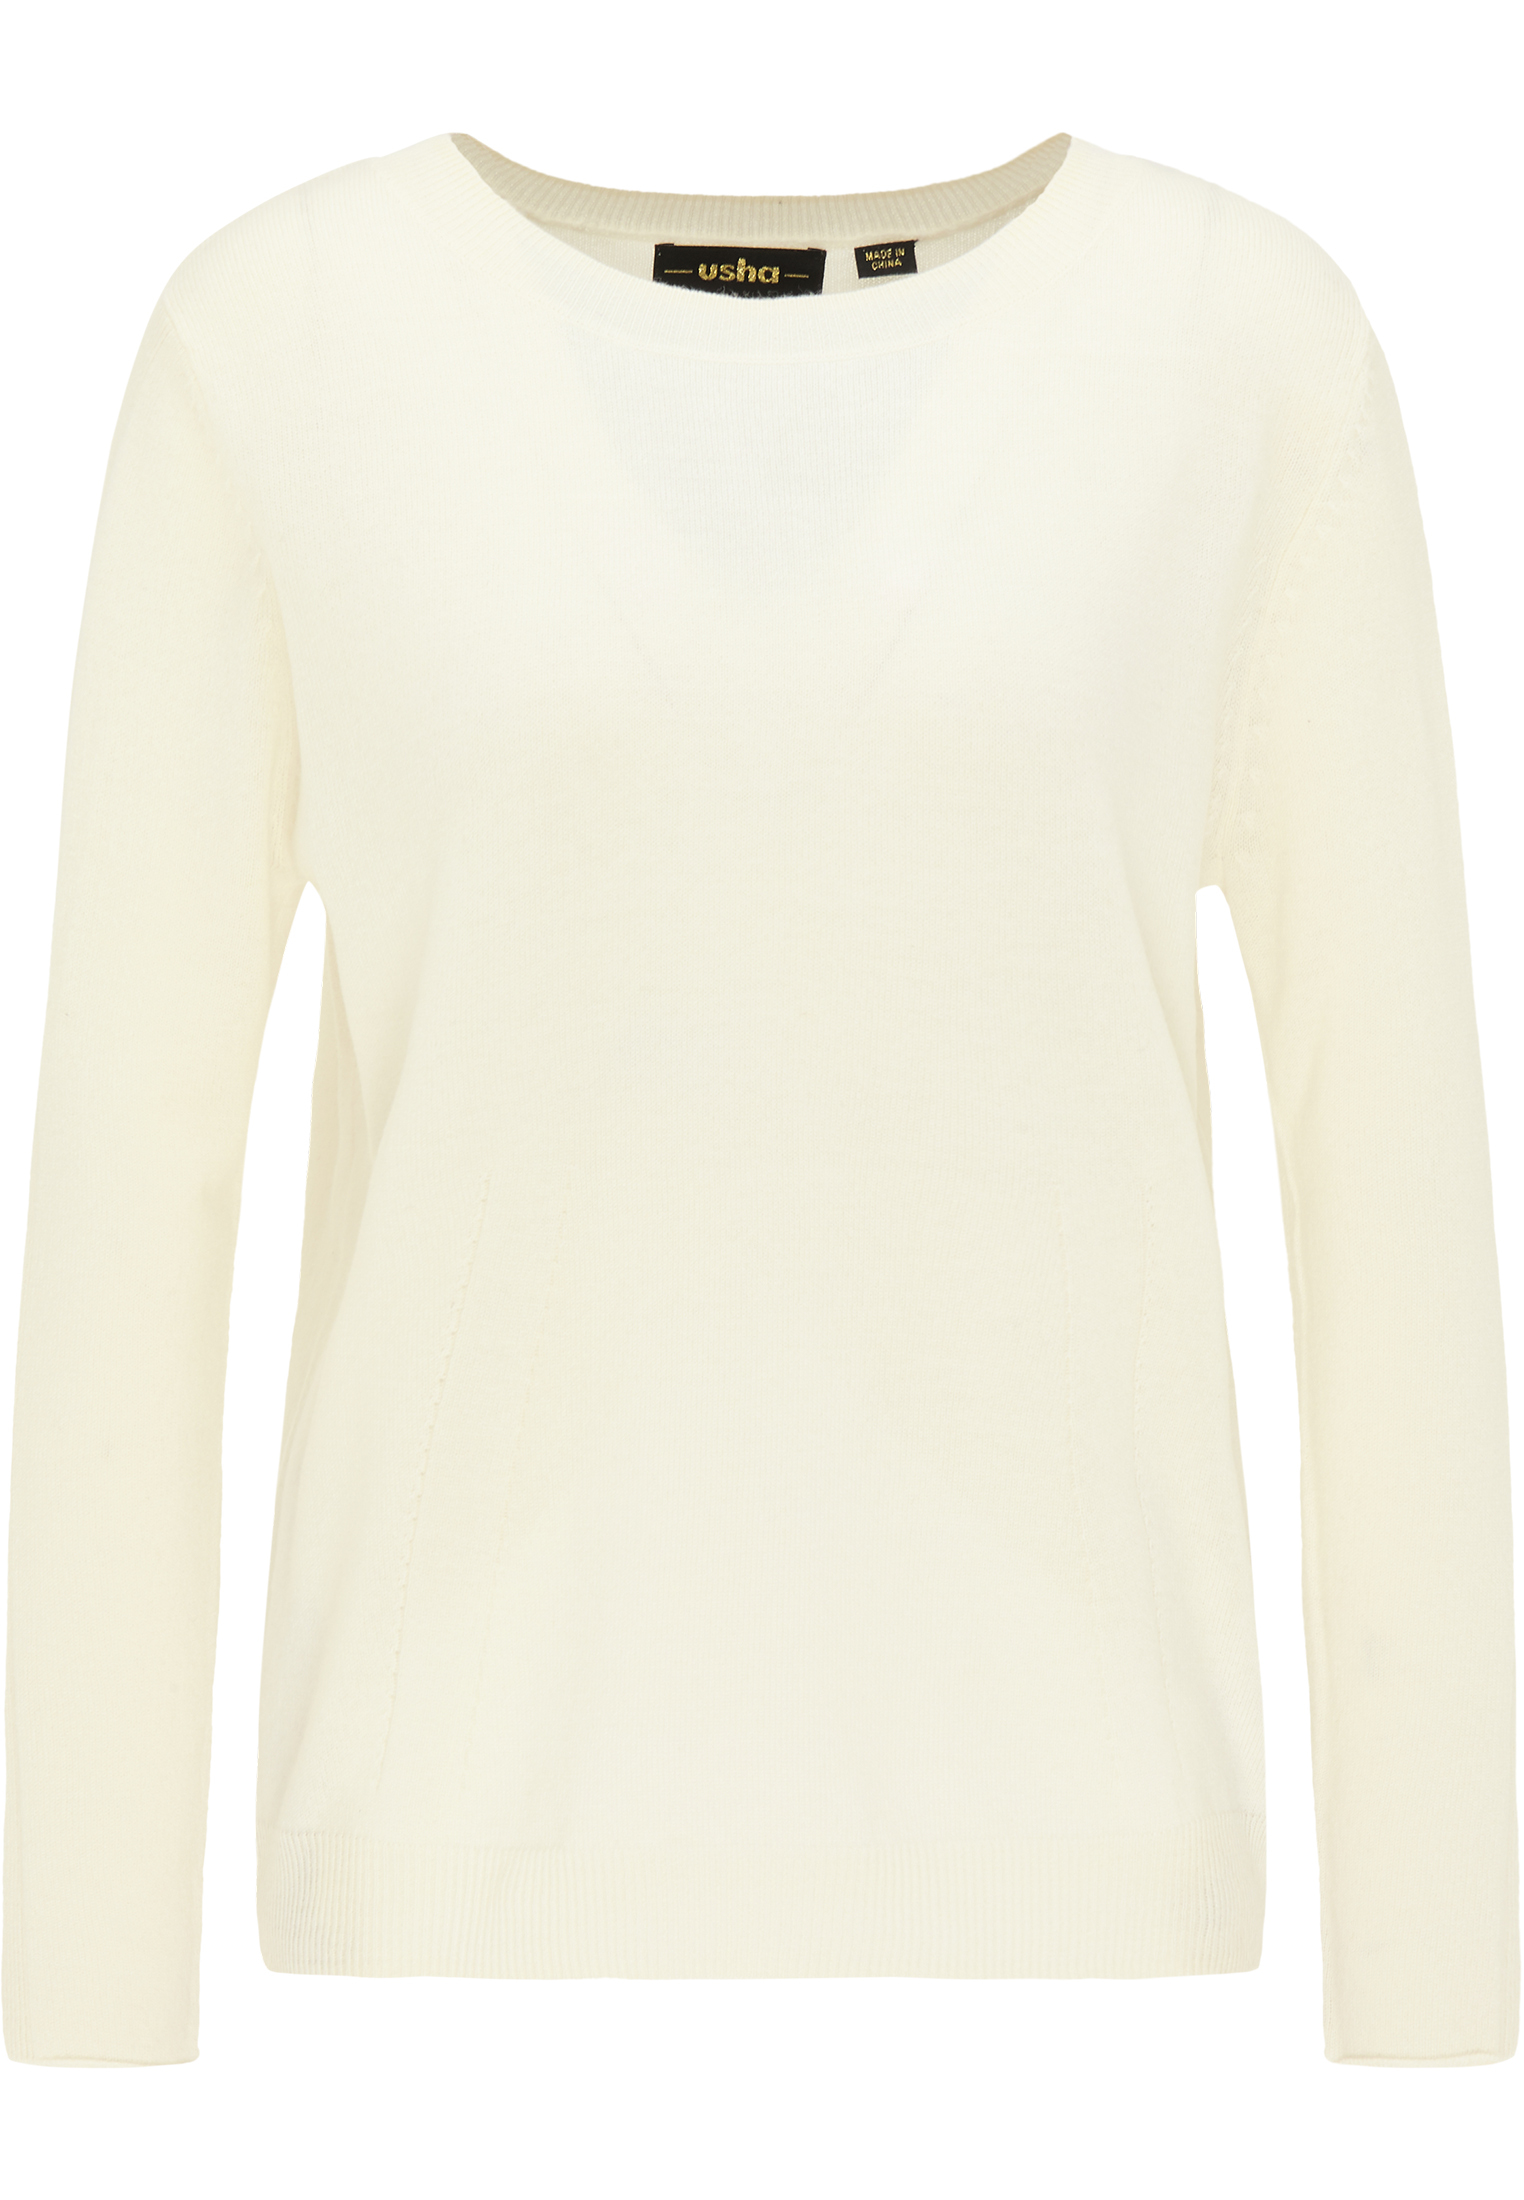 Donna pAalo usha BLACK LABEL Pullover in Bianco 